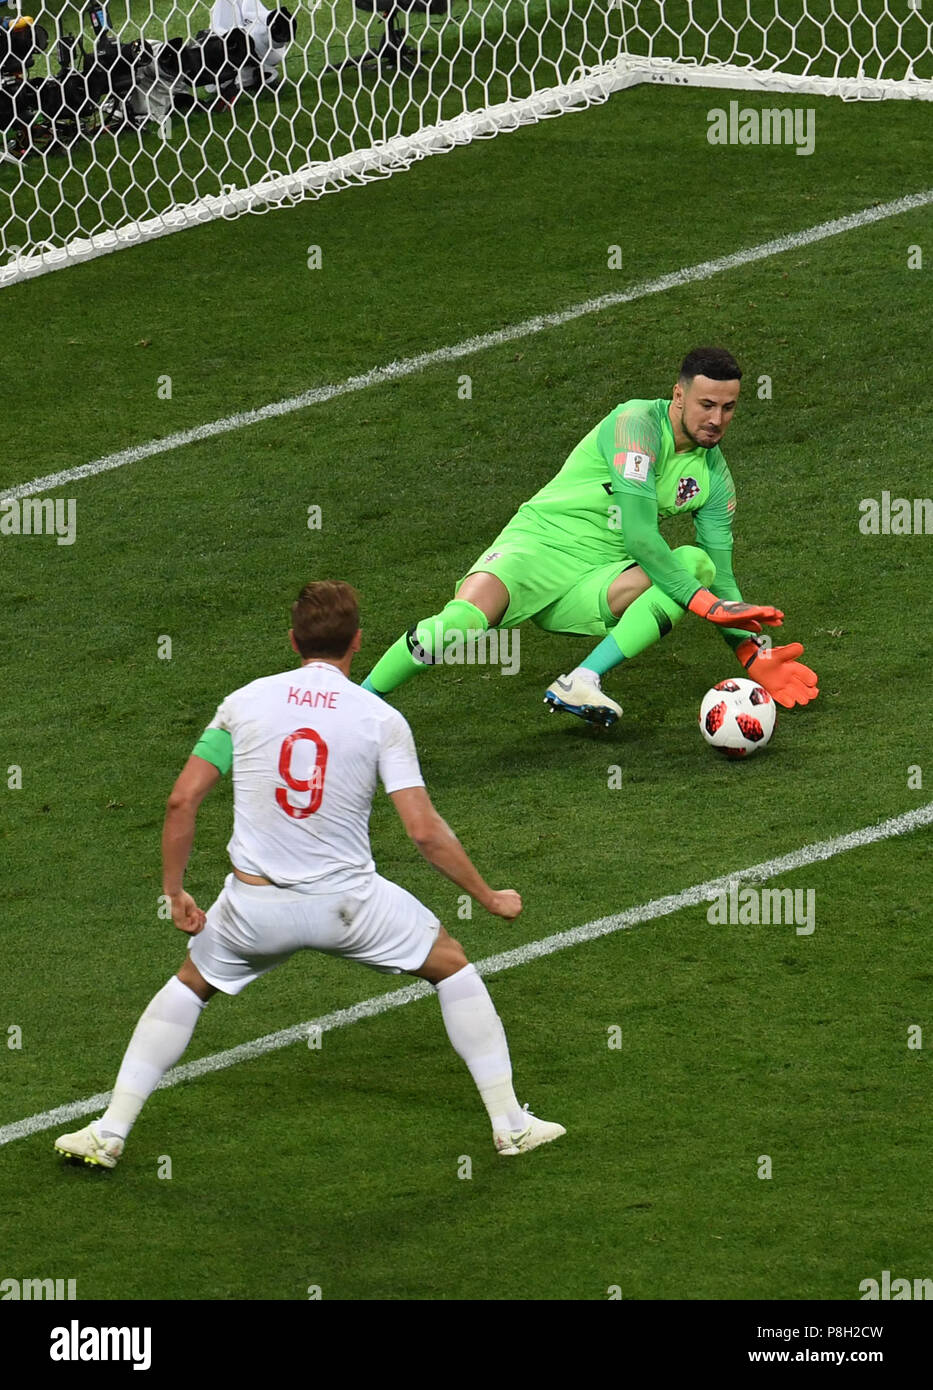 Moscow, Russia. 11th July, 2018. Goalkeepers Danijel Subasic (R) of Croatia defends during the 2018 FIFA World Cup semi-final match between England and Croatia in Moscow, Russia, July 11, 2018. Credit: Wang Yuguo/Xinhua/Alamy Live News Stock Photo